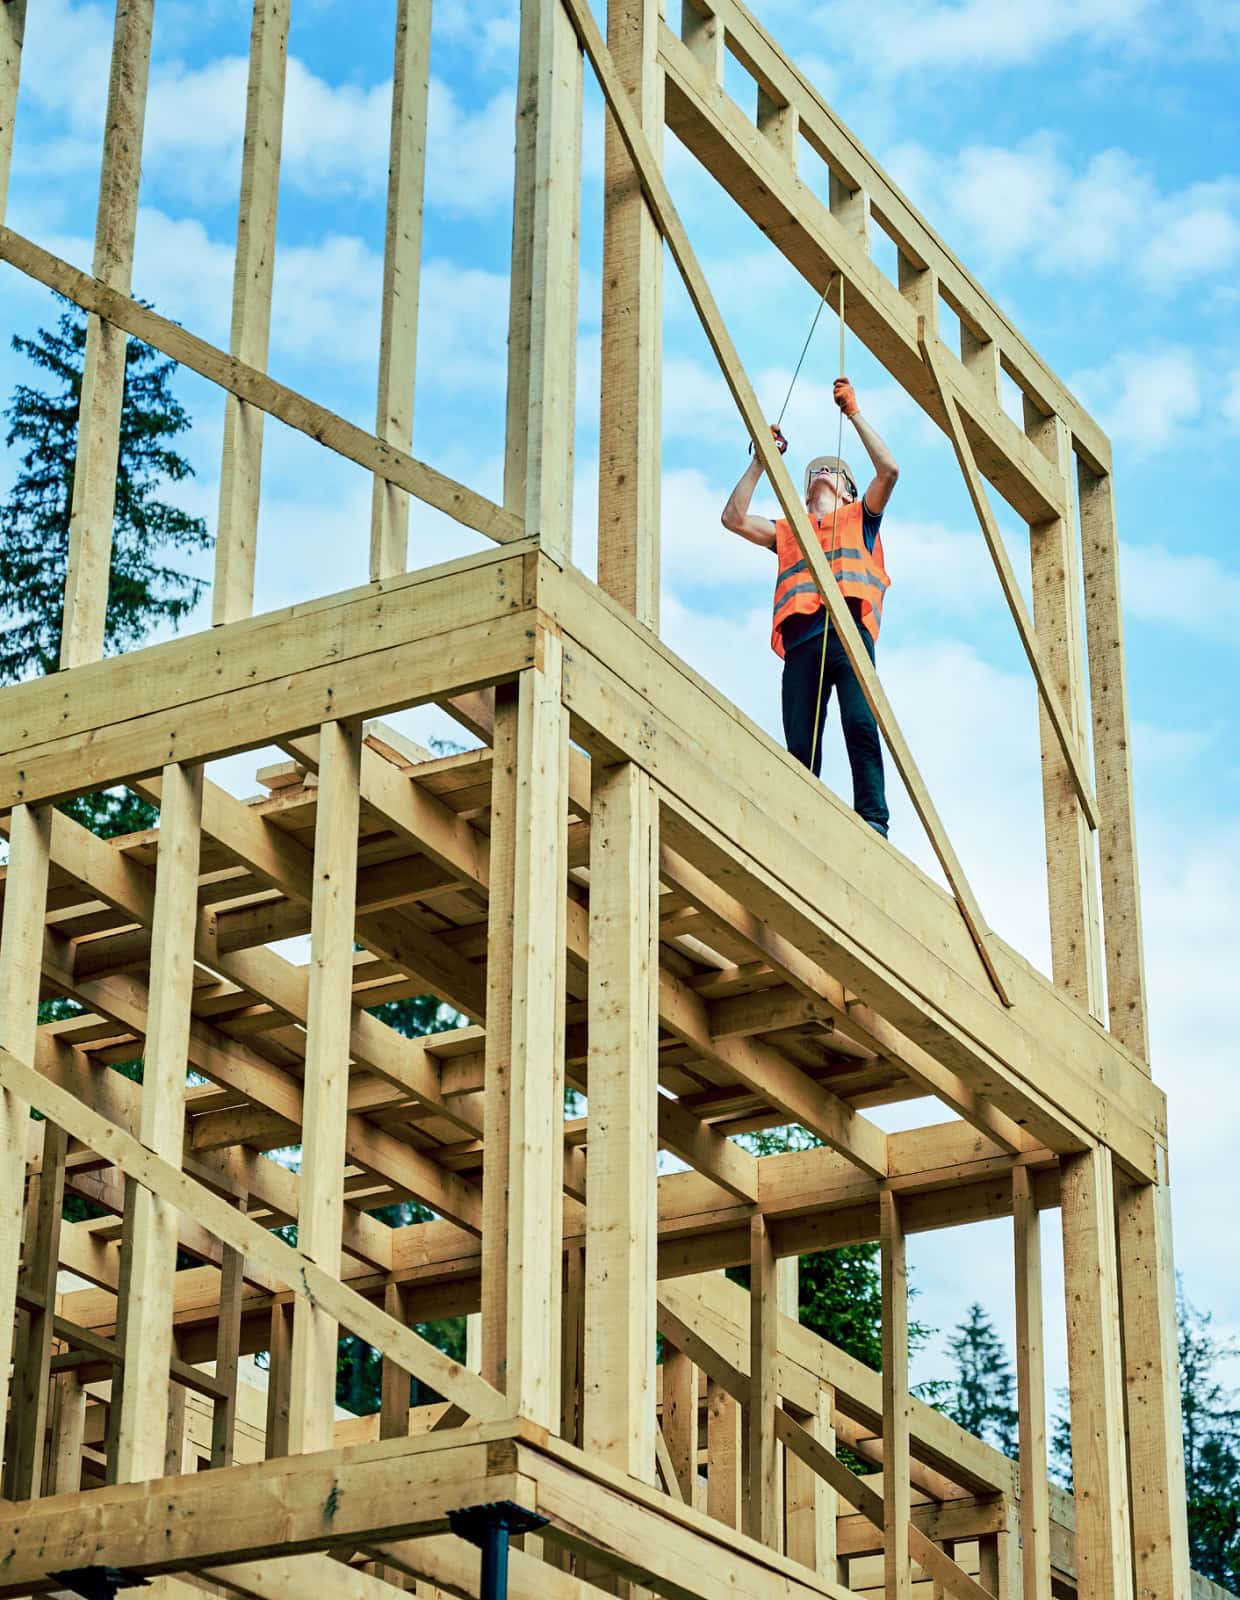 A construction worker stands on the second floor of a partially-framed house.